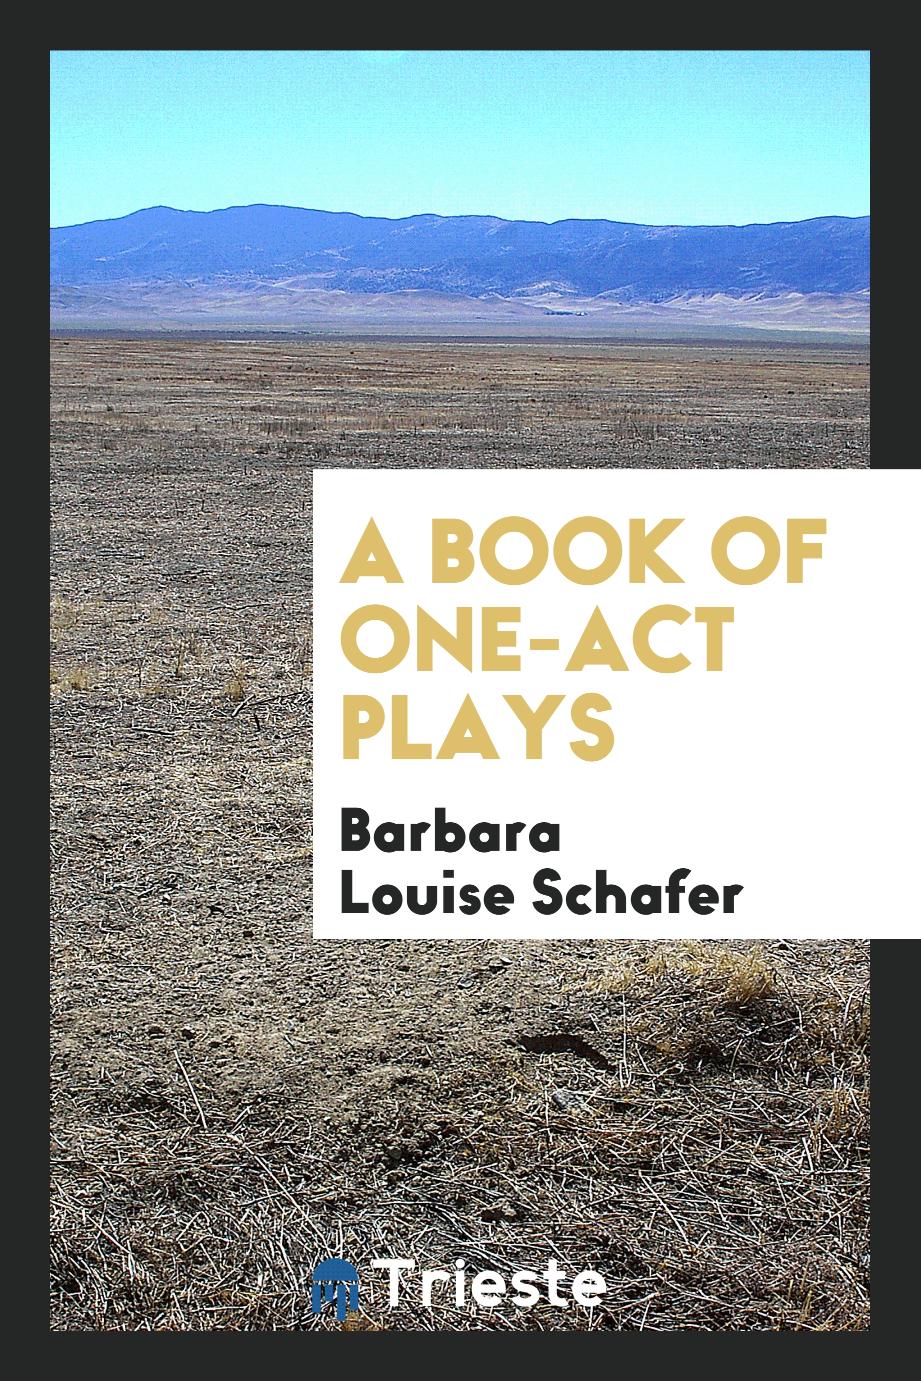 A book of one-act plays